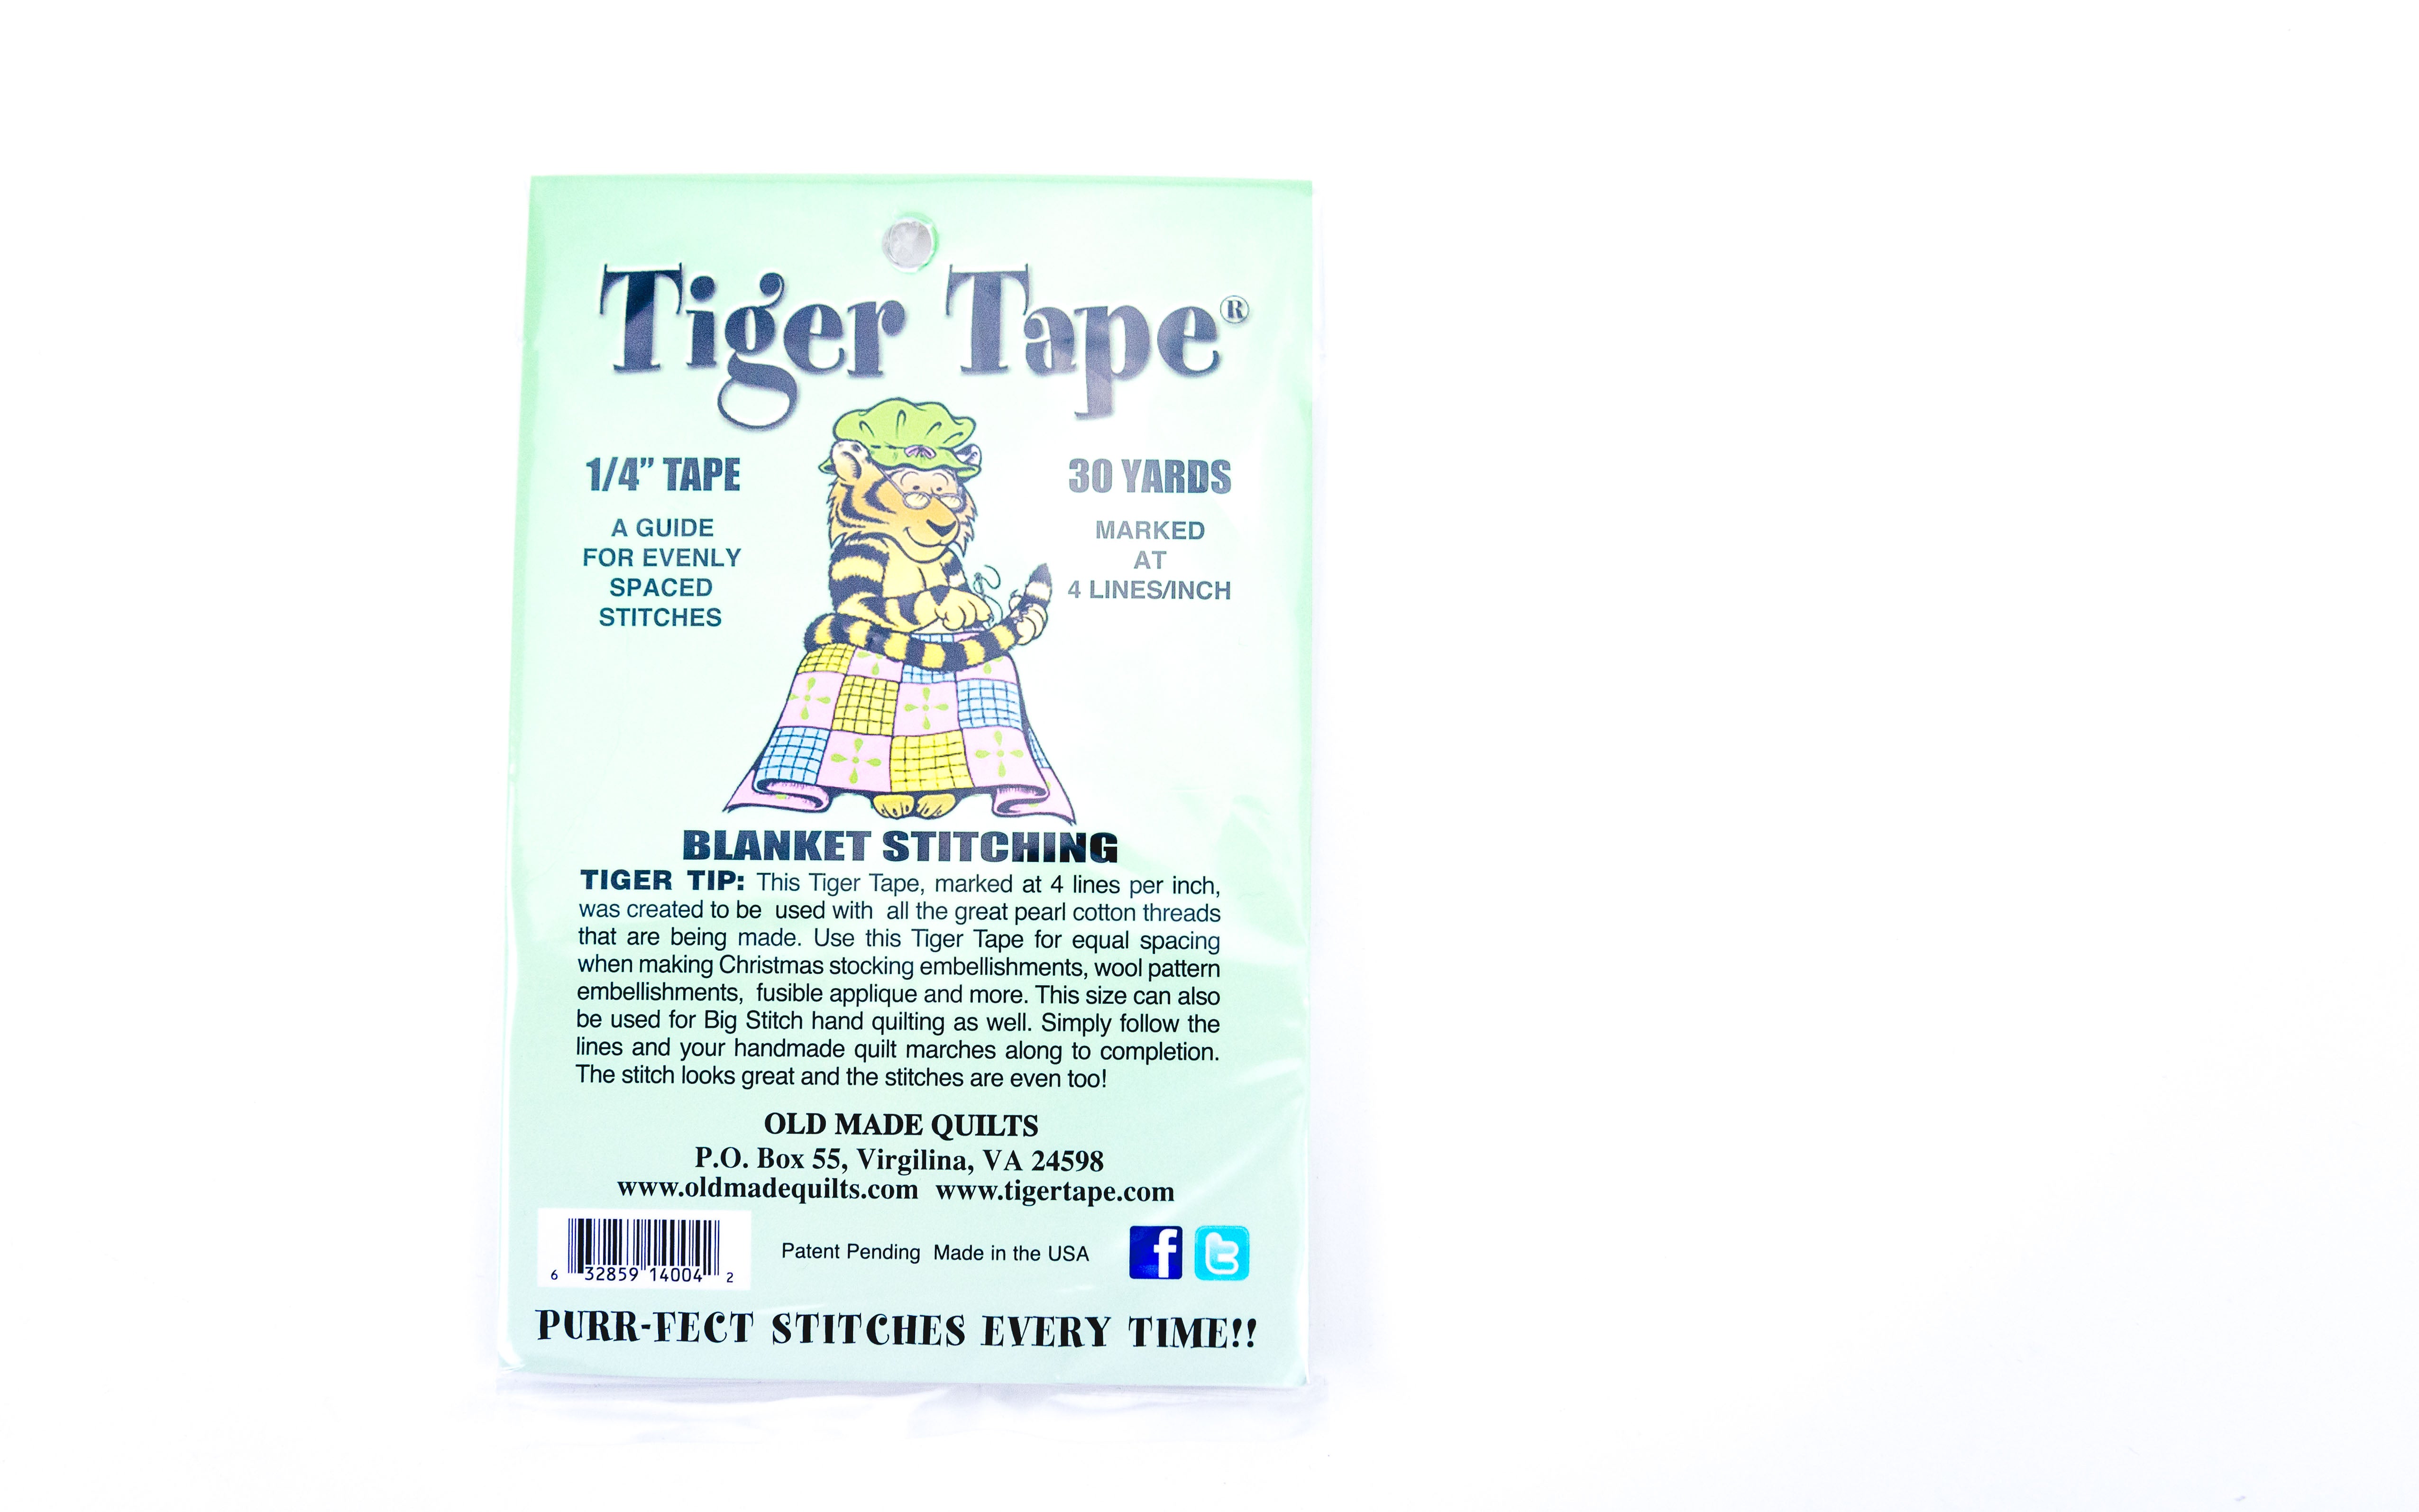 Tiger Tape Marked at 1/4 in. - 632859140042 Quilting Notions